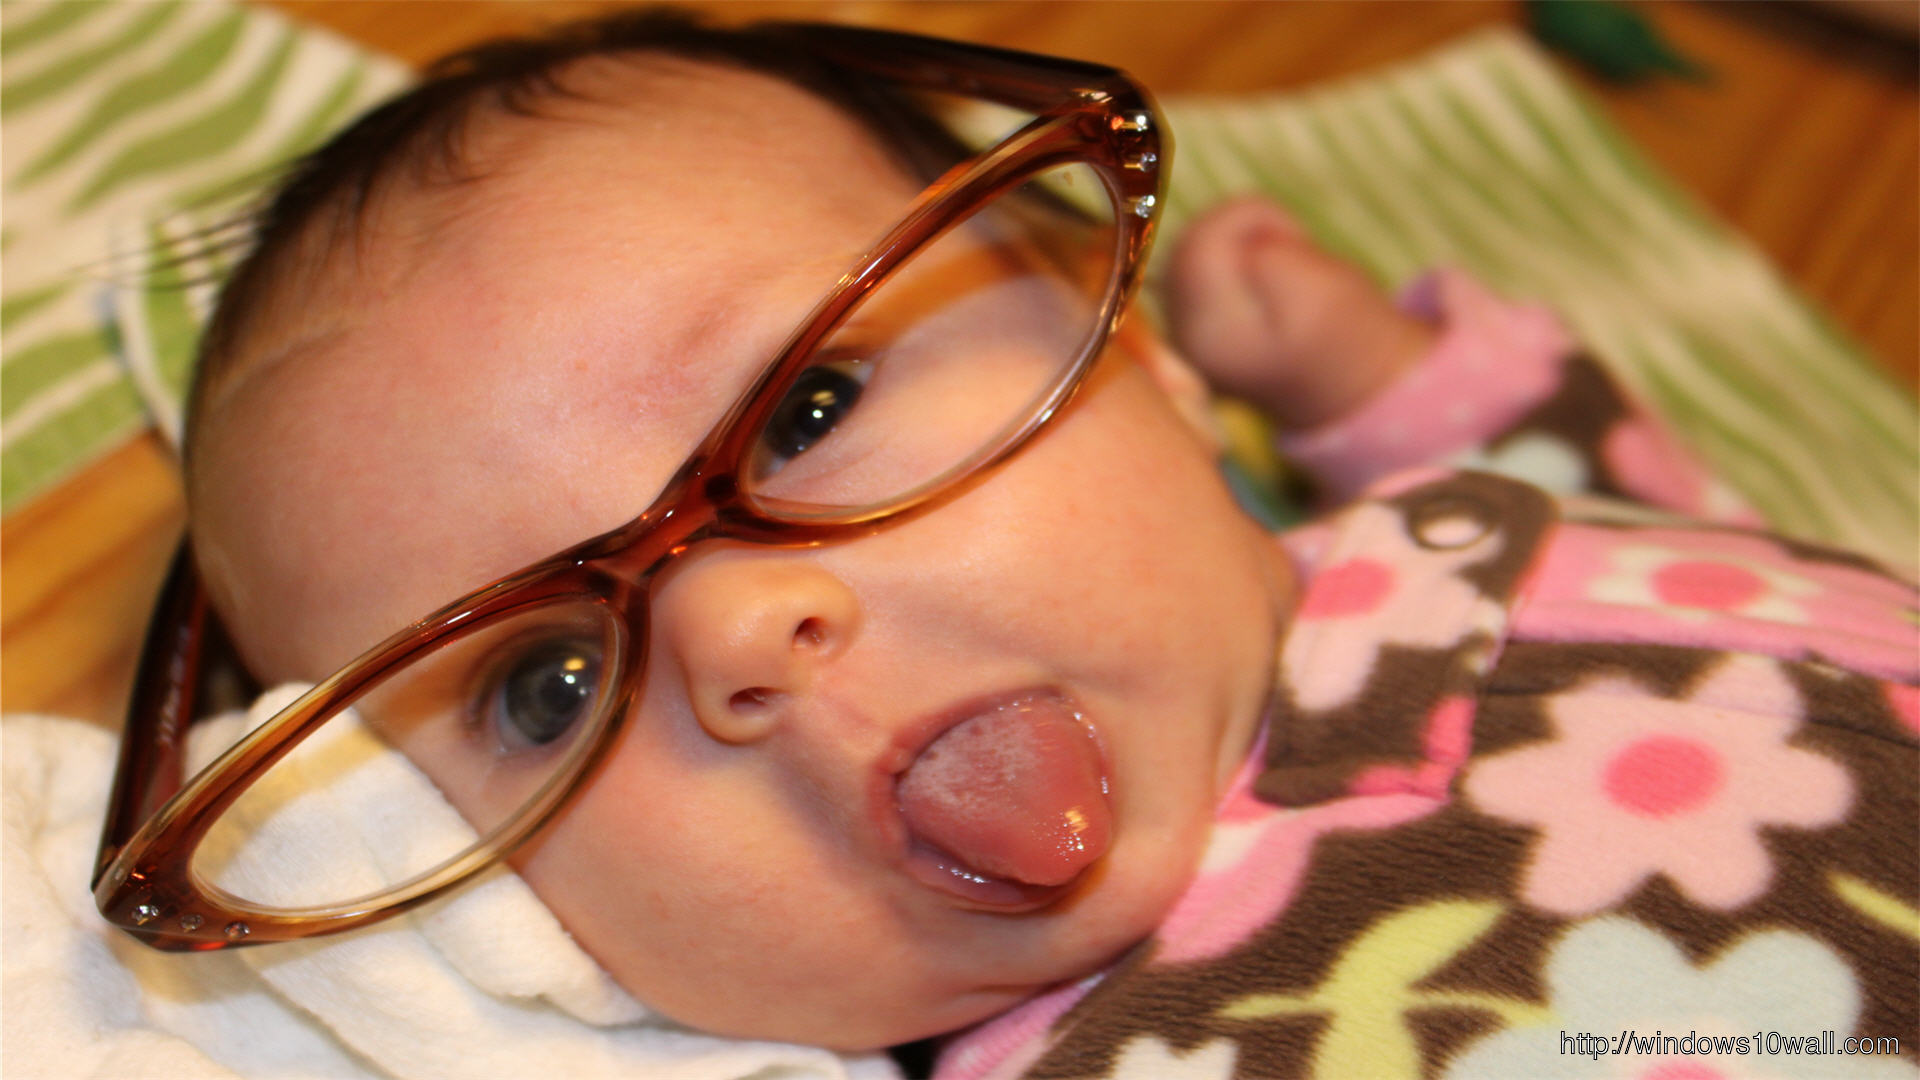 Funny Baby HD Wallpaper free download